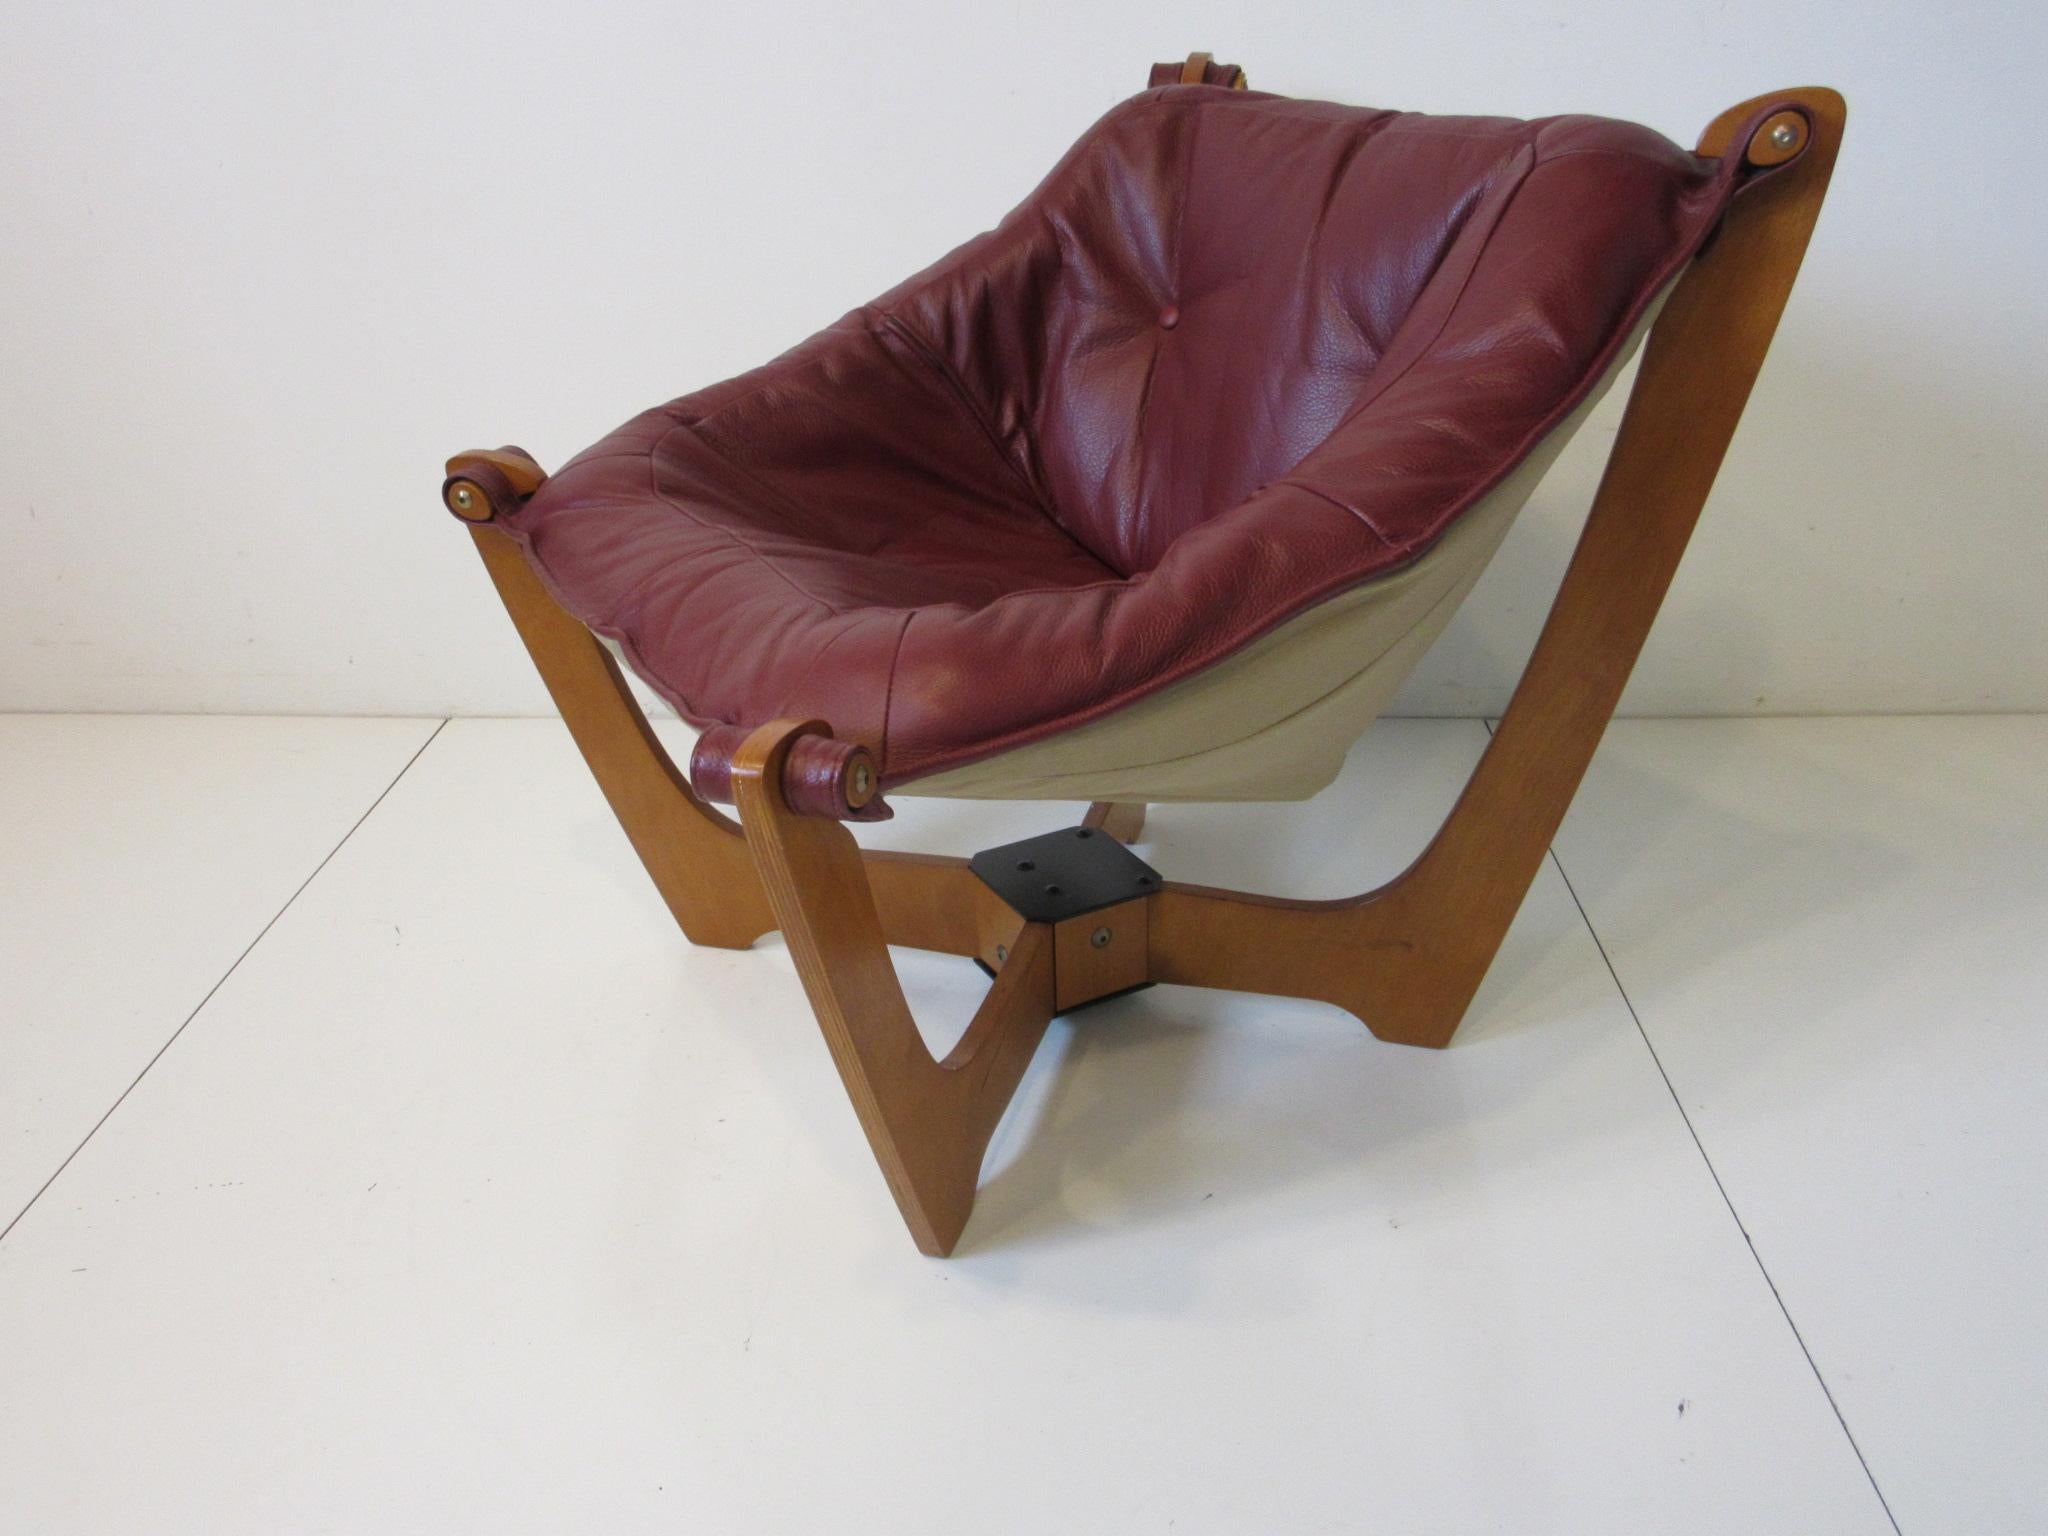 Luna Leather Lounge Chair by Odd Knutsen Norway 1